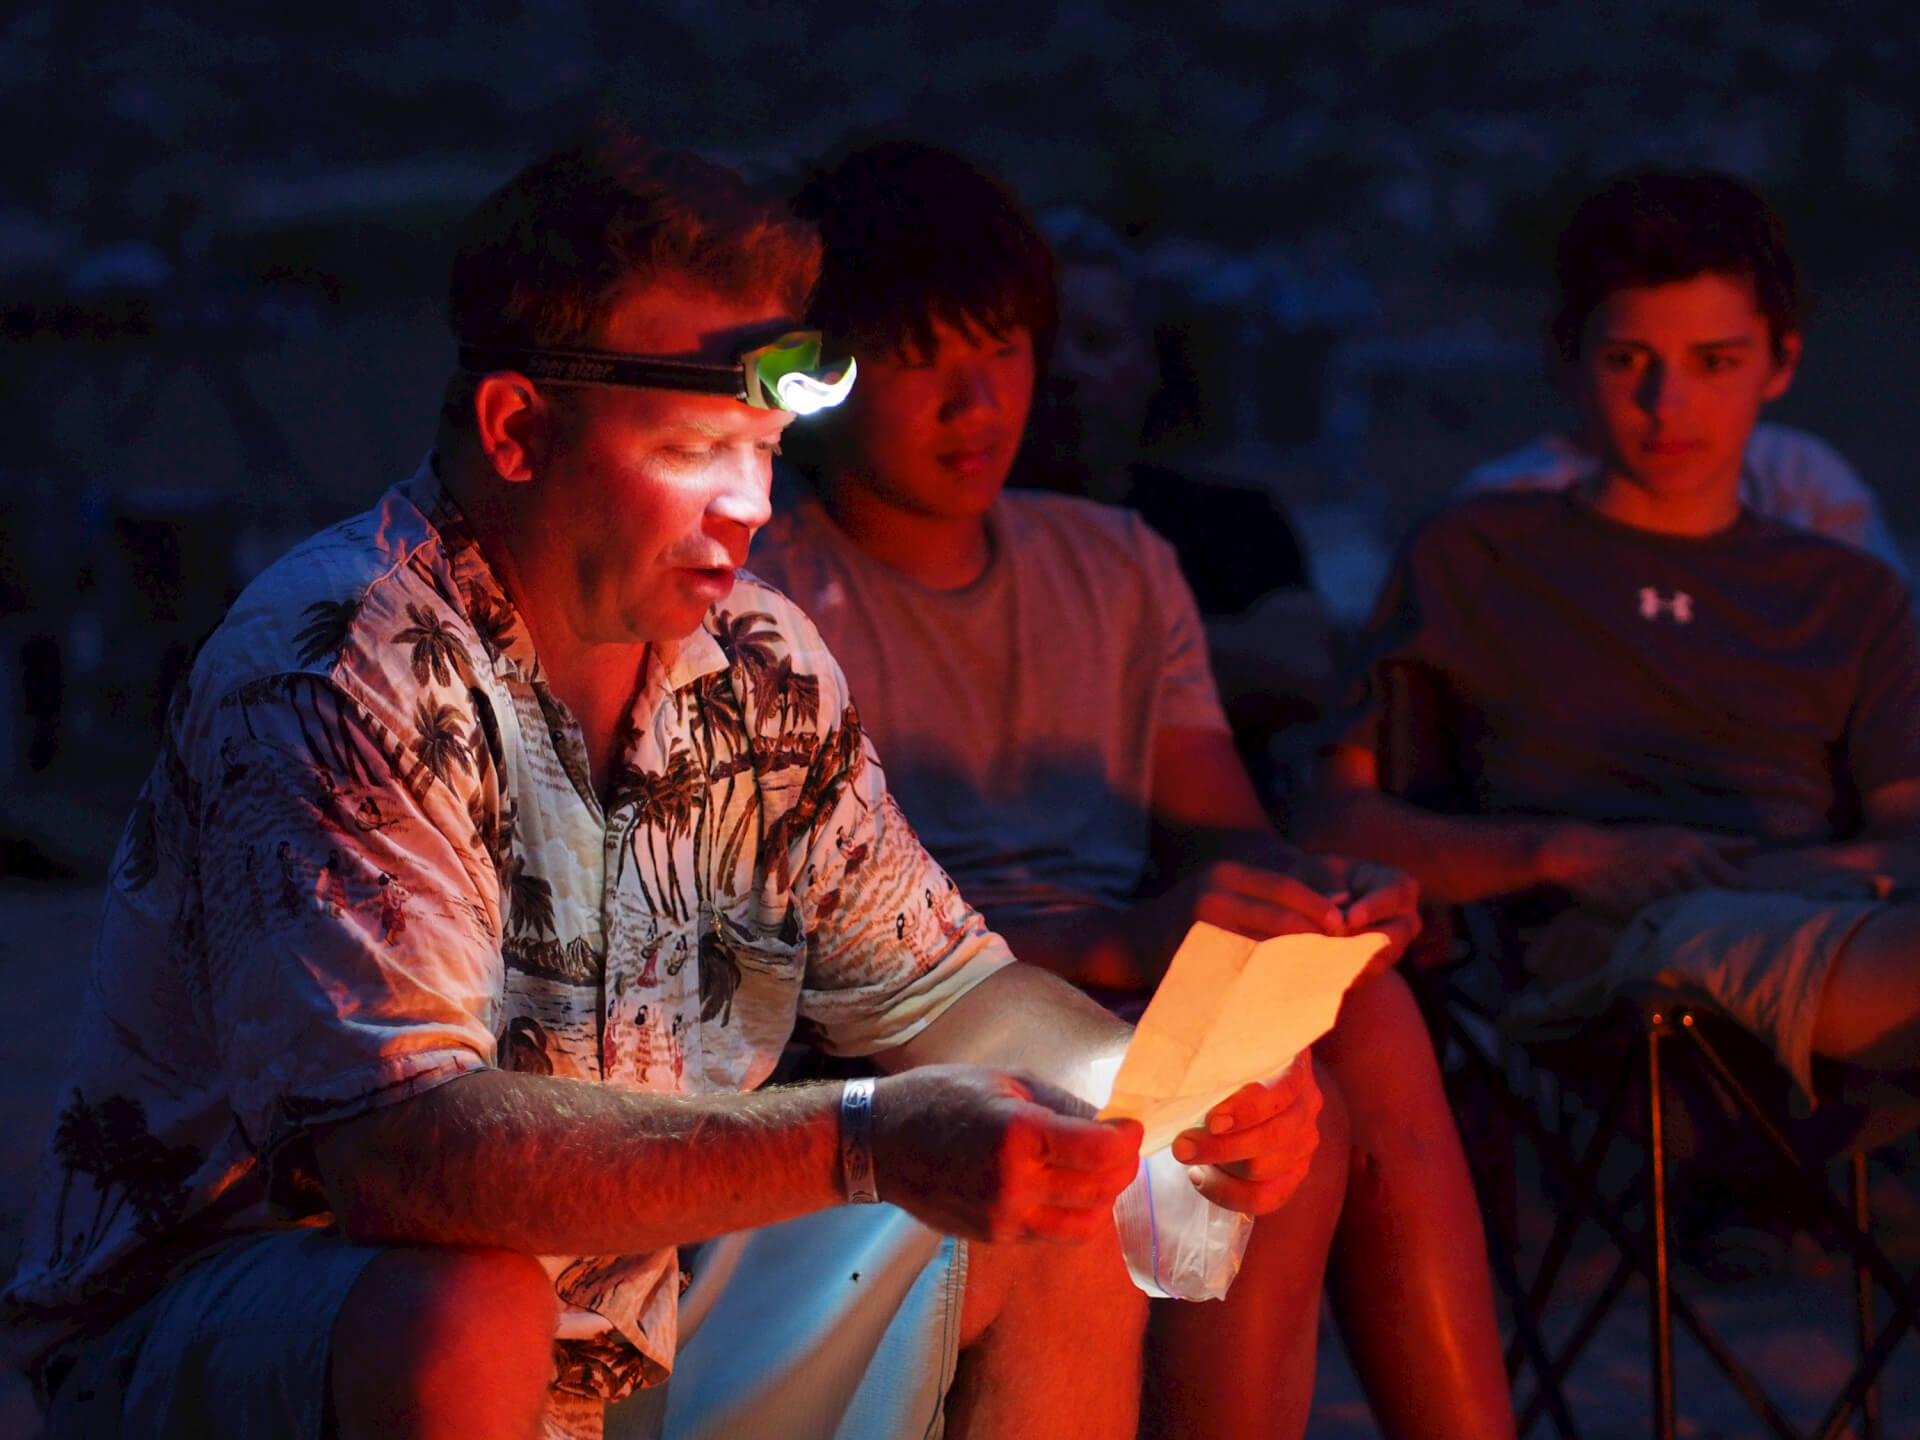 Brock reads river stories to Grand Canyon Whitewater rafters. 